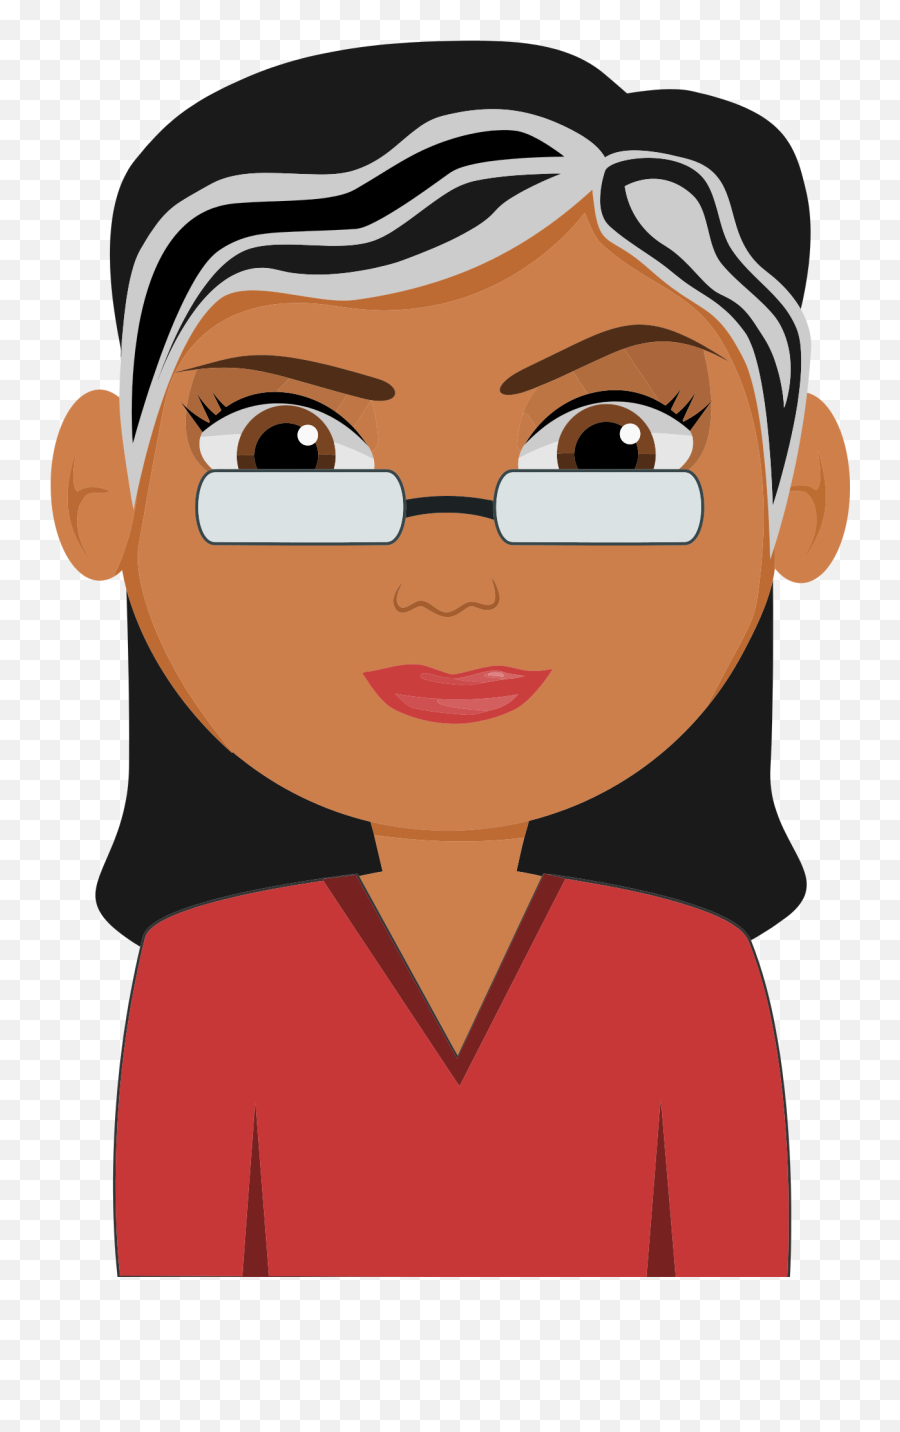 Teacher With The Glasse From Cartoon Clipart Free Image Download Emoji,Comic Clipart